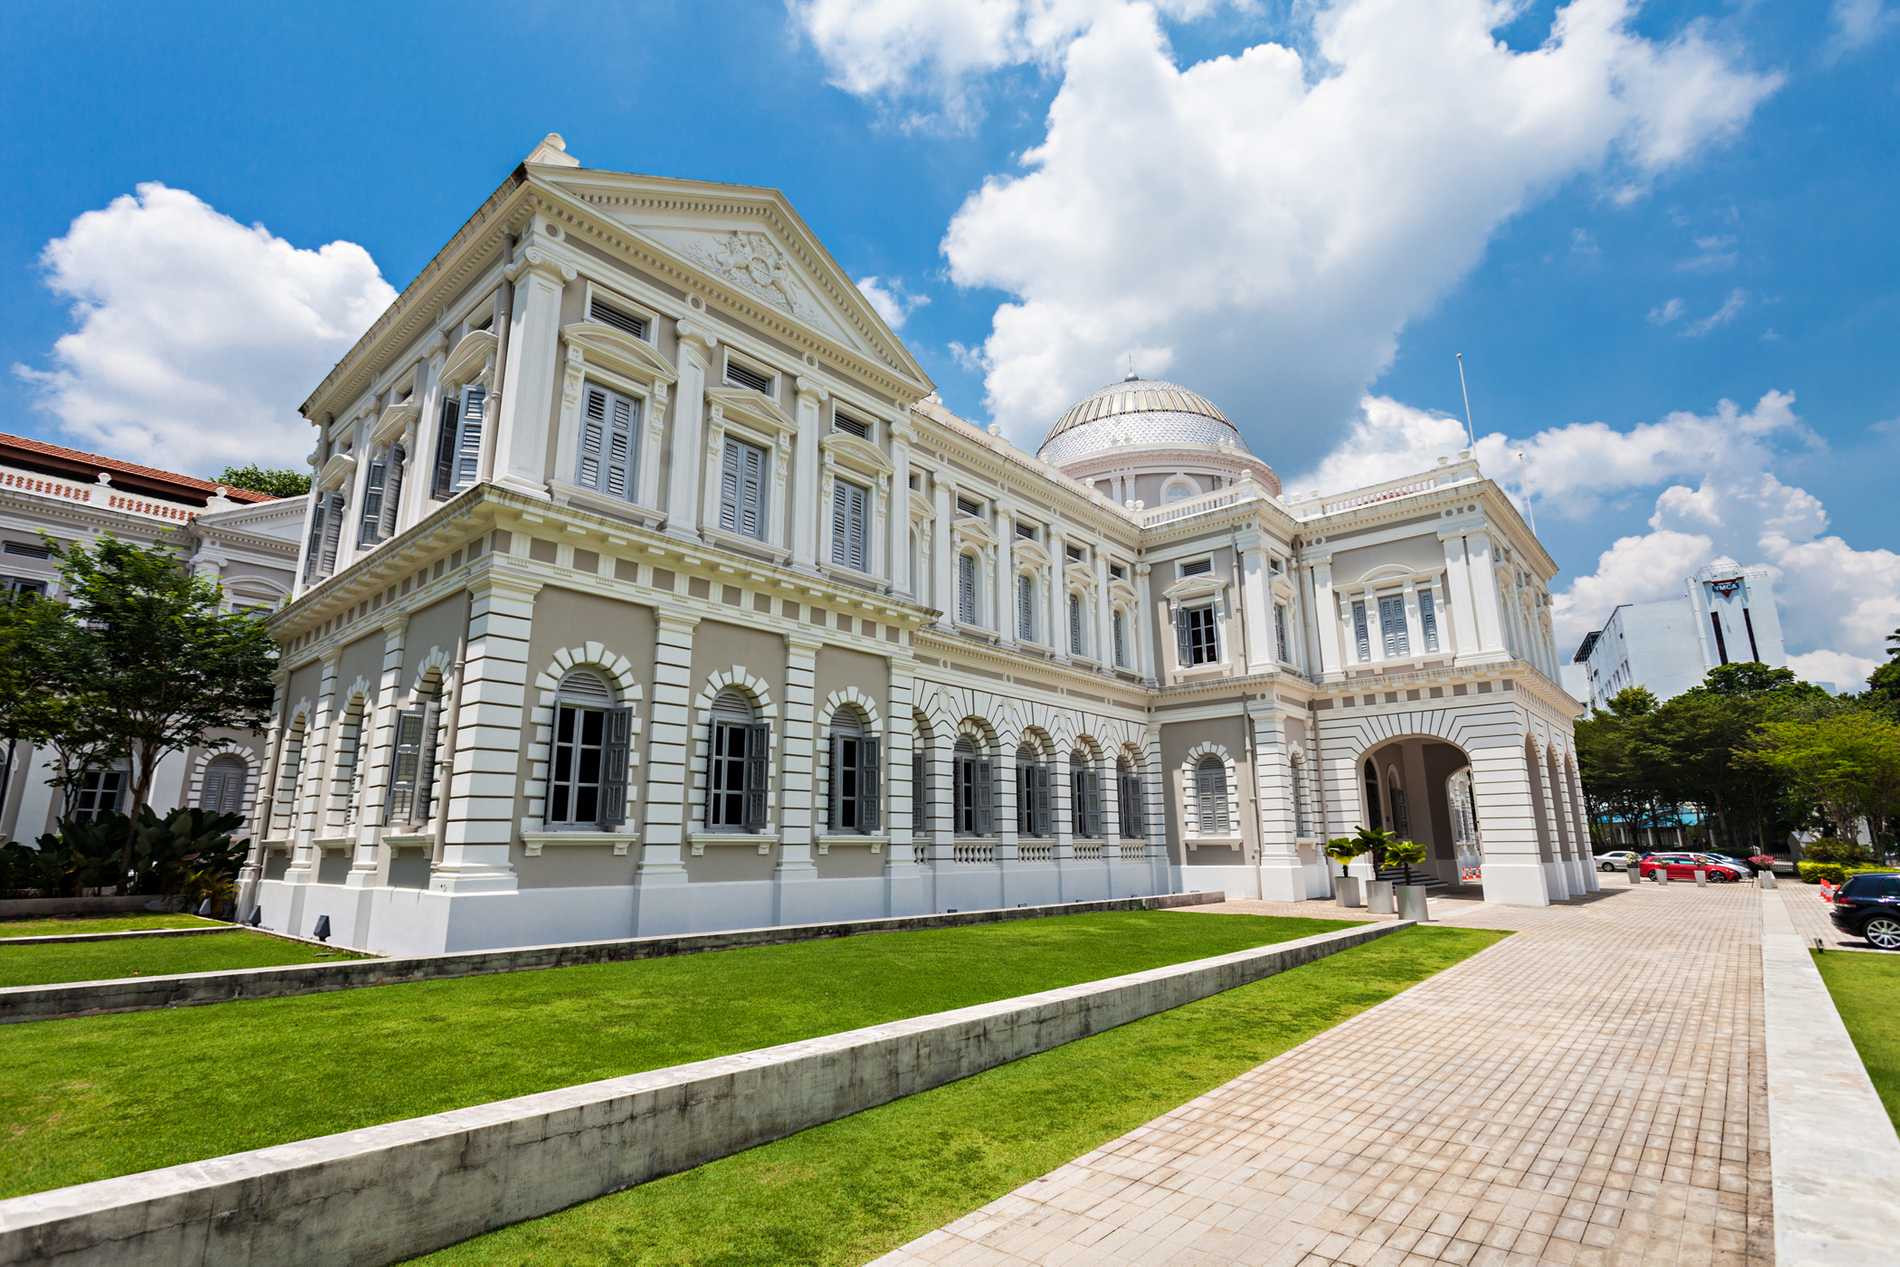 The Neo-Palladian and Renaissance style exterior of the National Museum of Singapore.